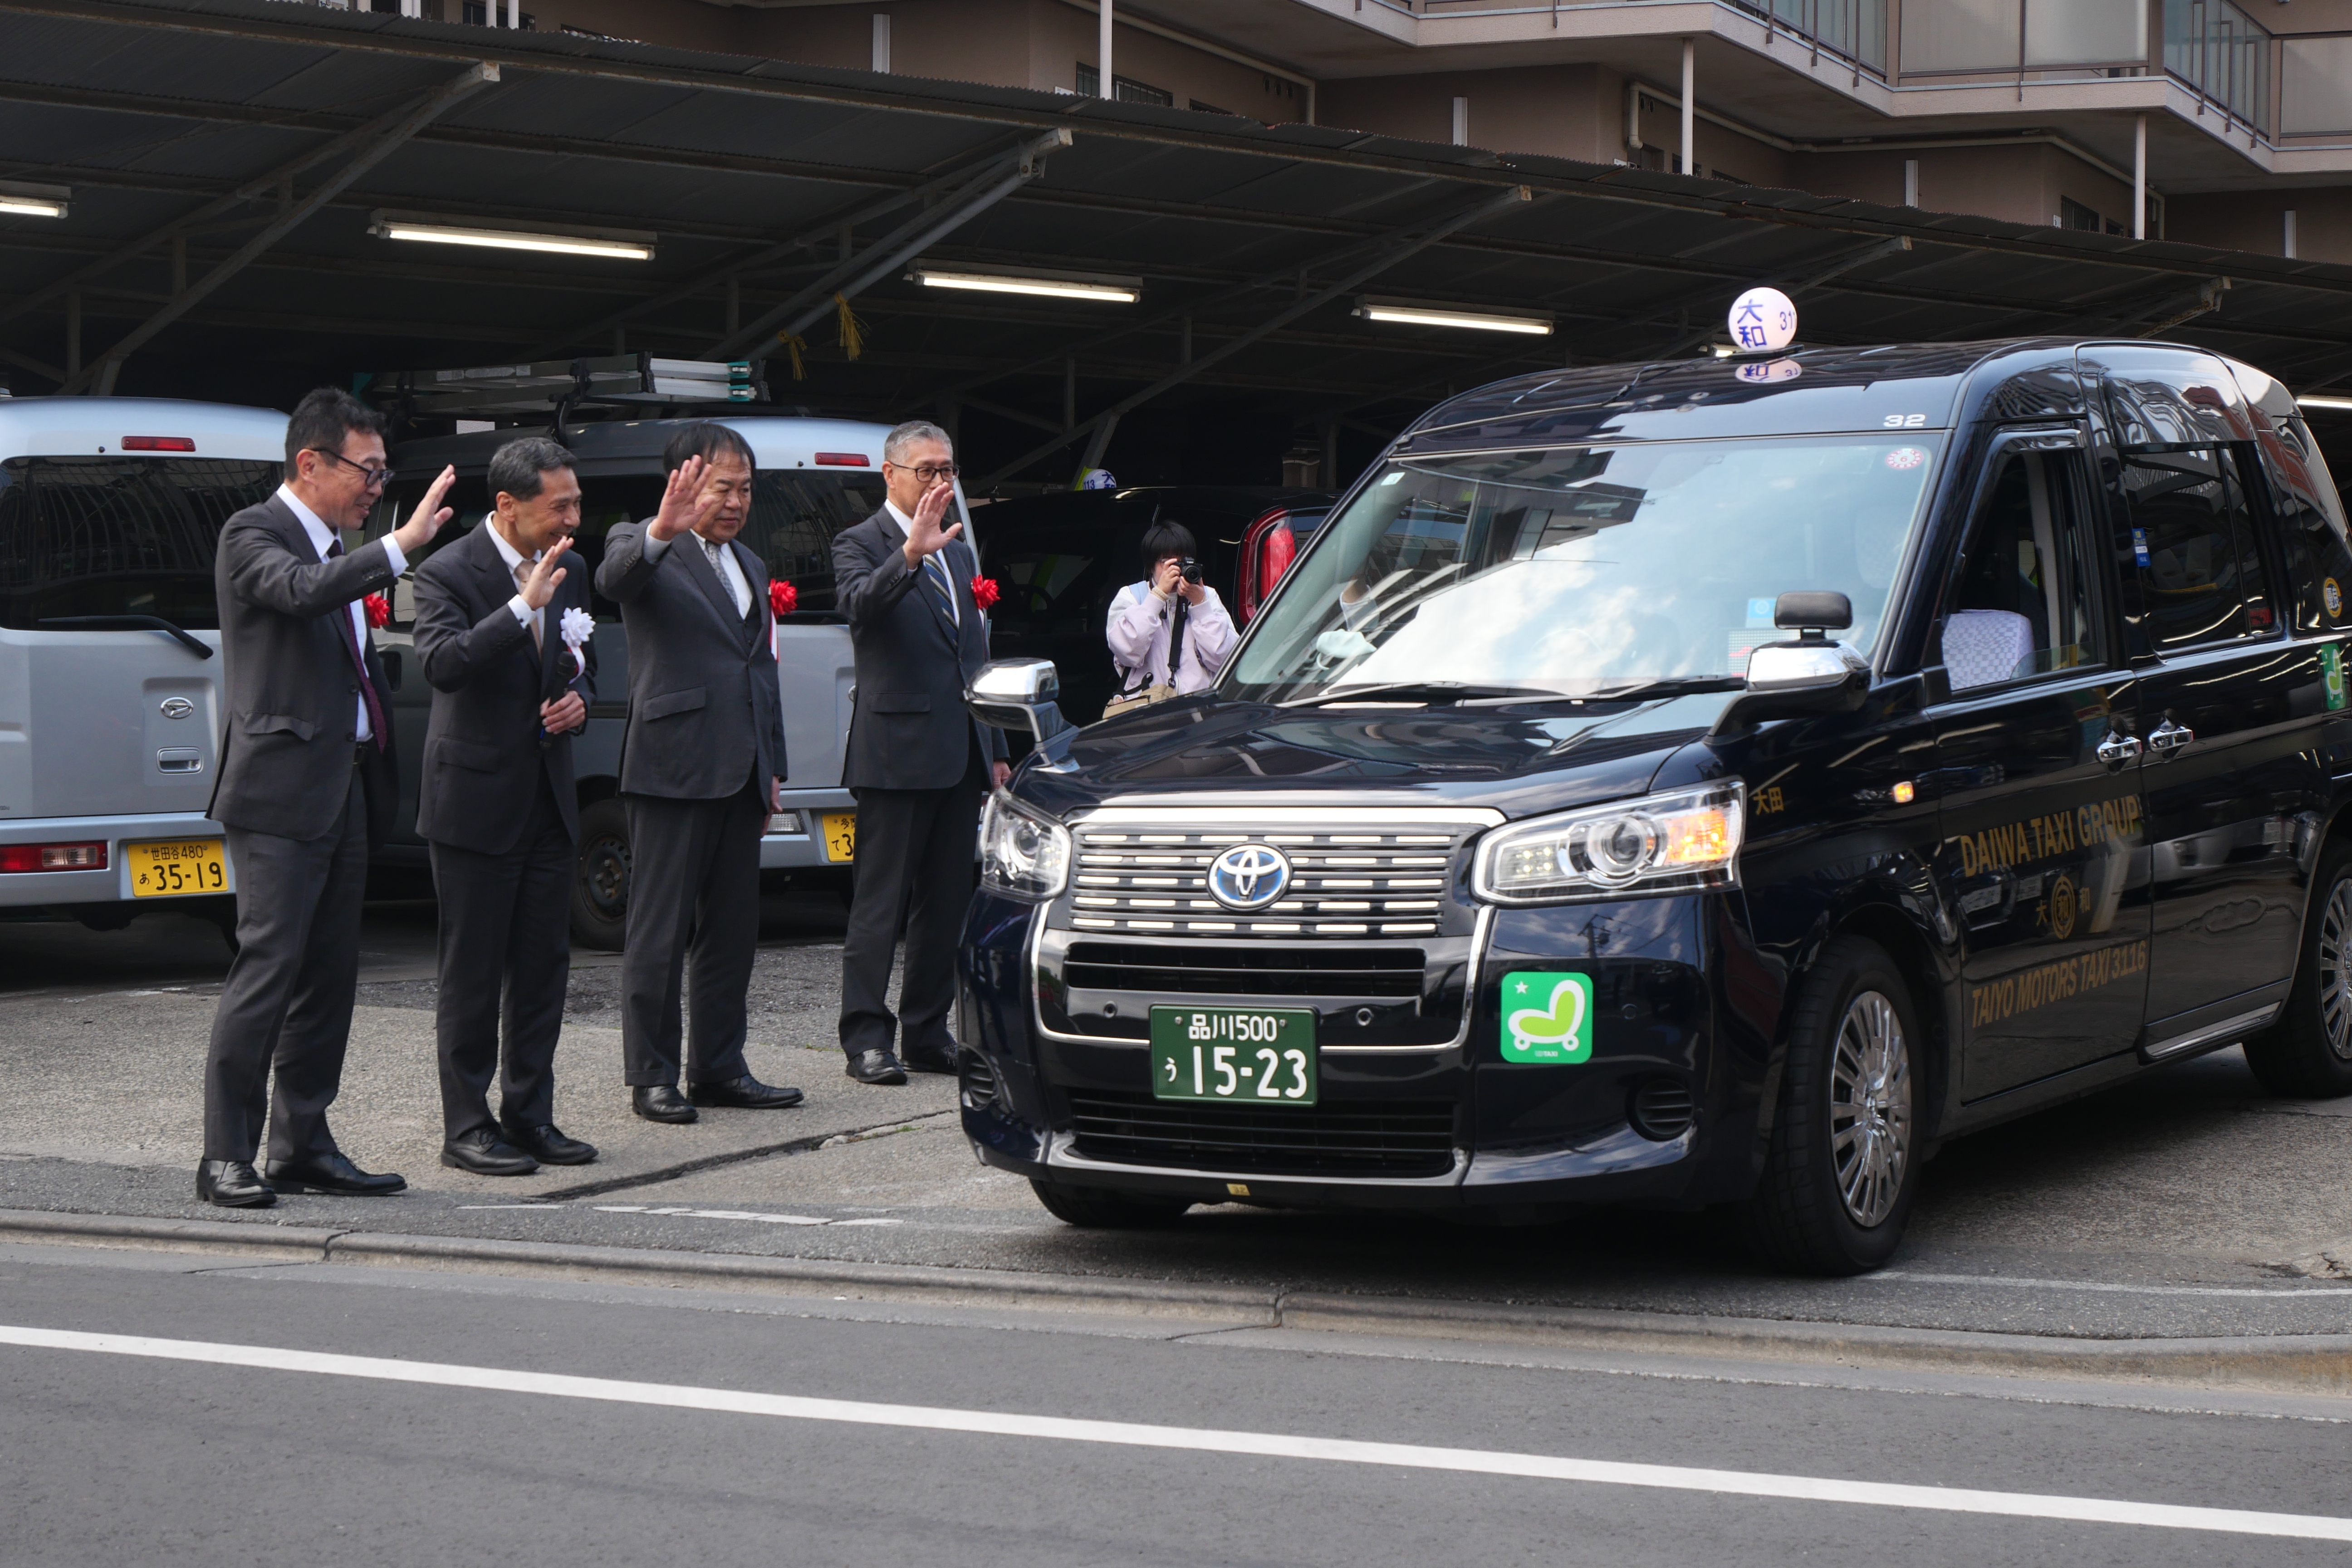  Taiyo motors departure ceremony-see off the taxi